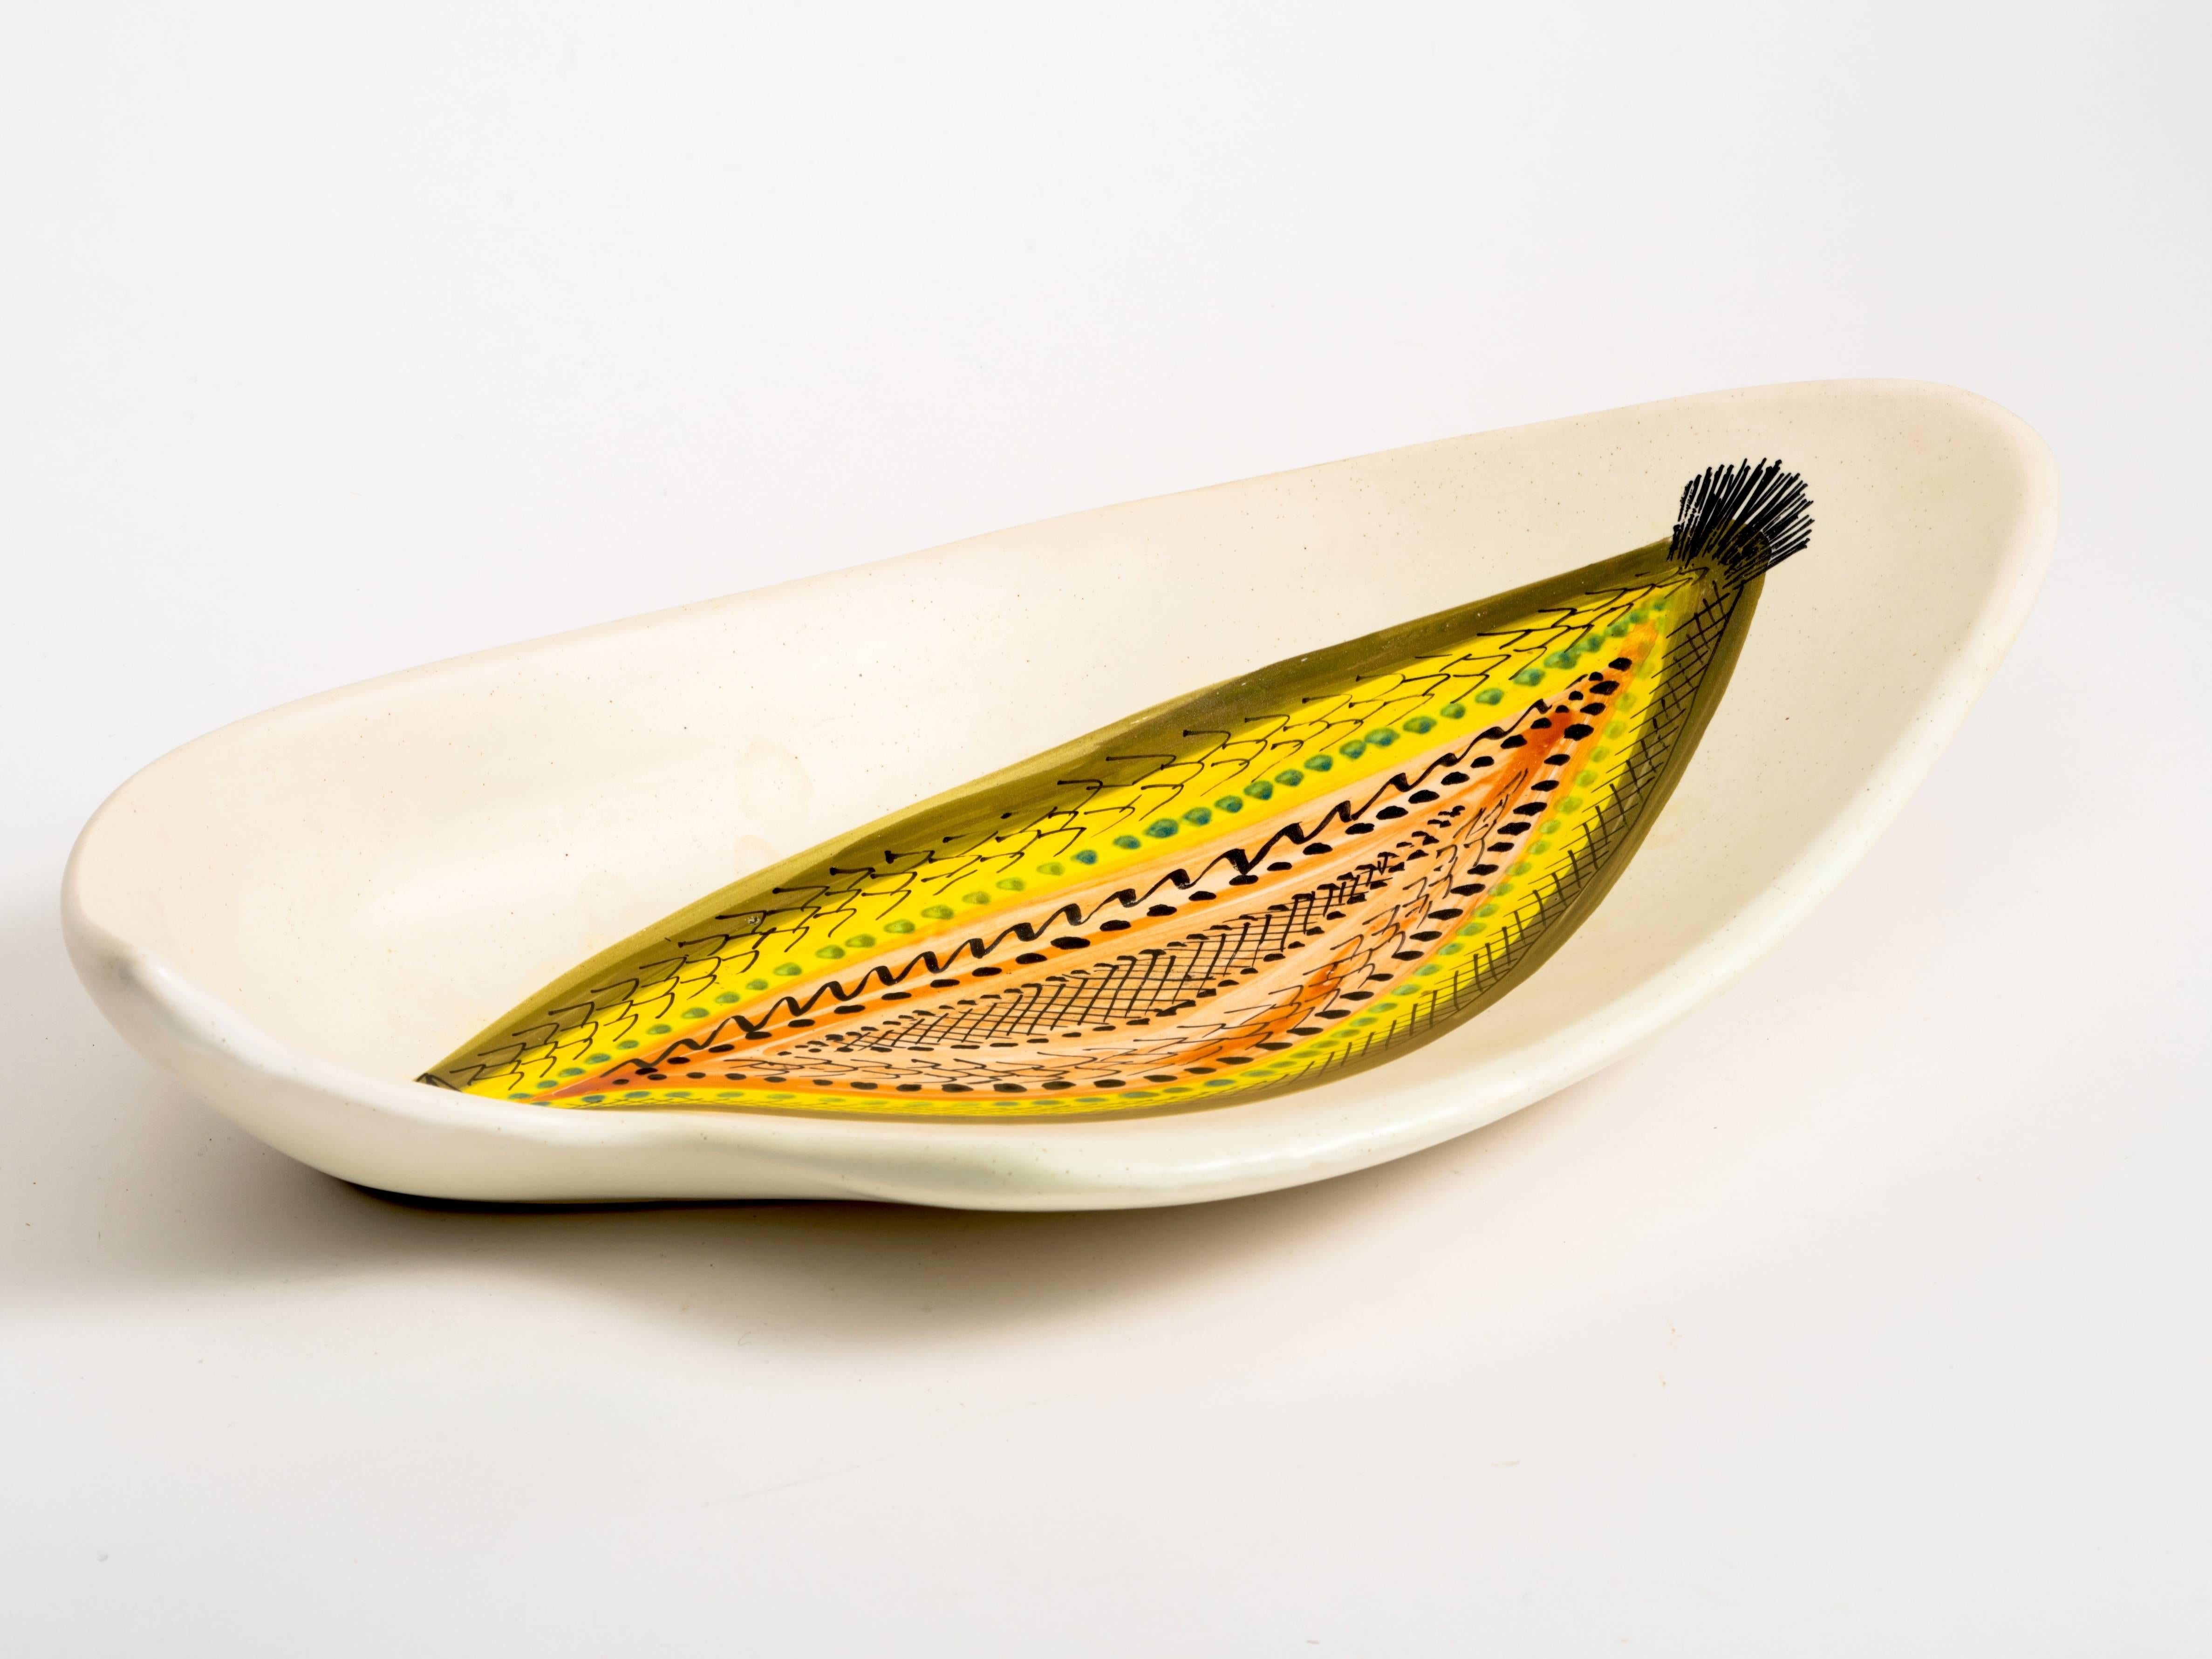 Fabulous hand-painted extra large flounder fish platter bowl by Roger Capron in vibrant colors of yellow, cream, orange, green and black. Rare design which is beautifully executed.

A second platter is also available of a hand-painted blue bird.